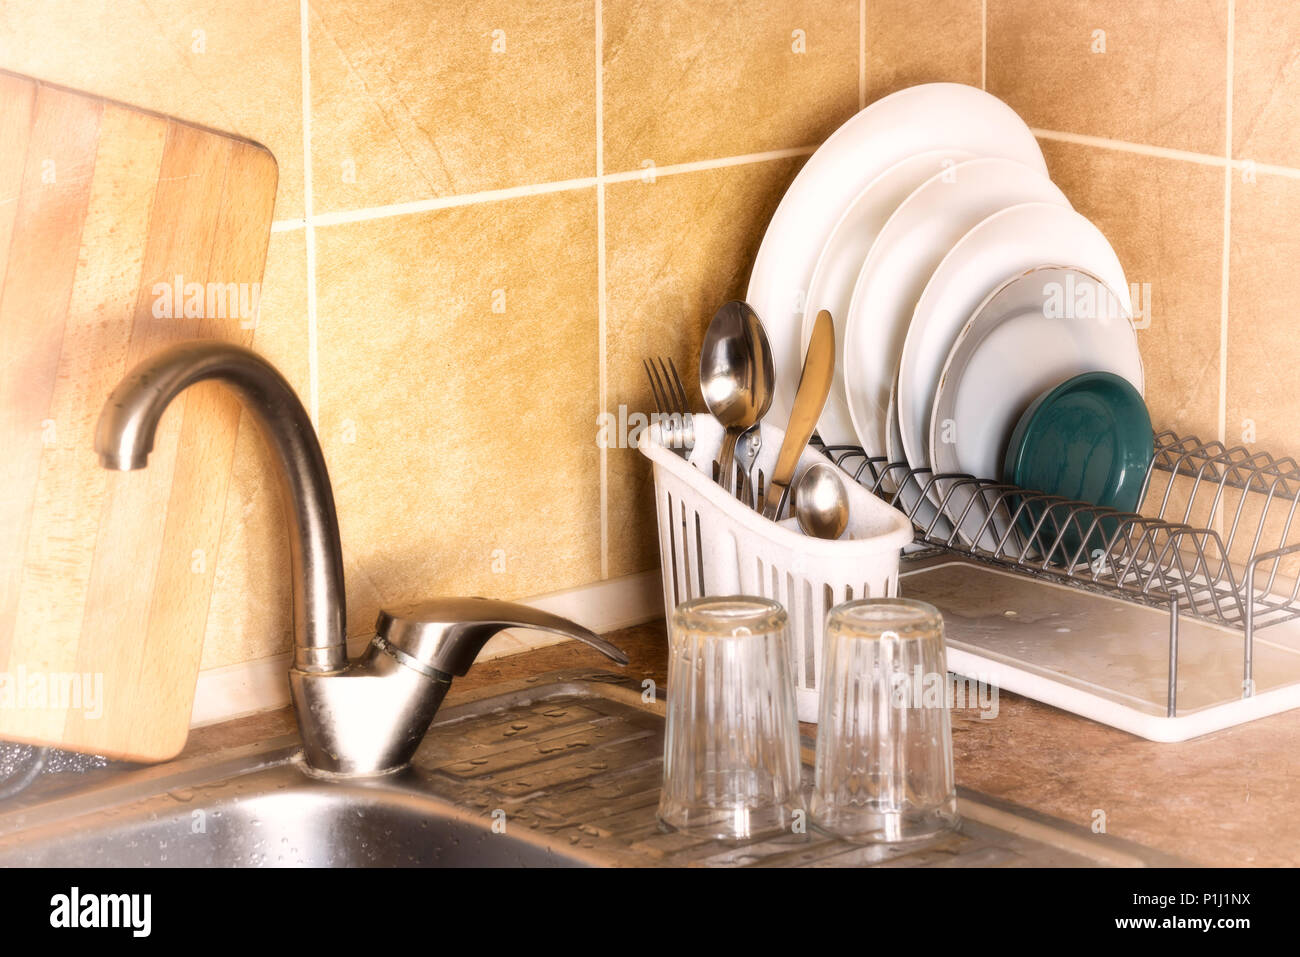 https www alamy com washed plates cutlery and glasses drying in their racks close to the sink in the kitchen image207535606 html